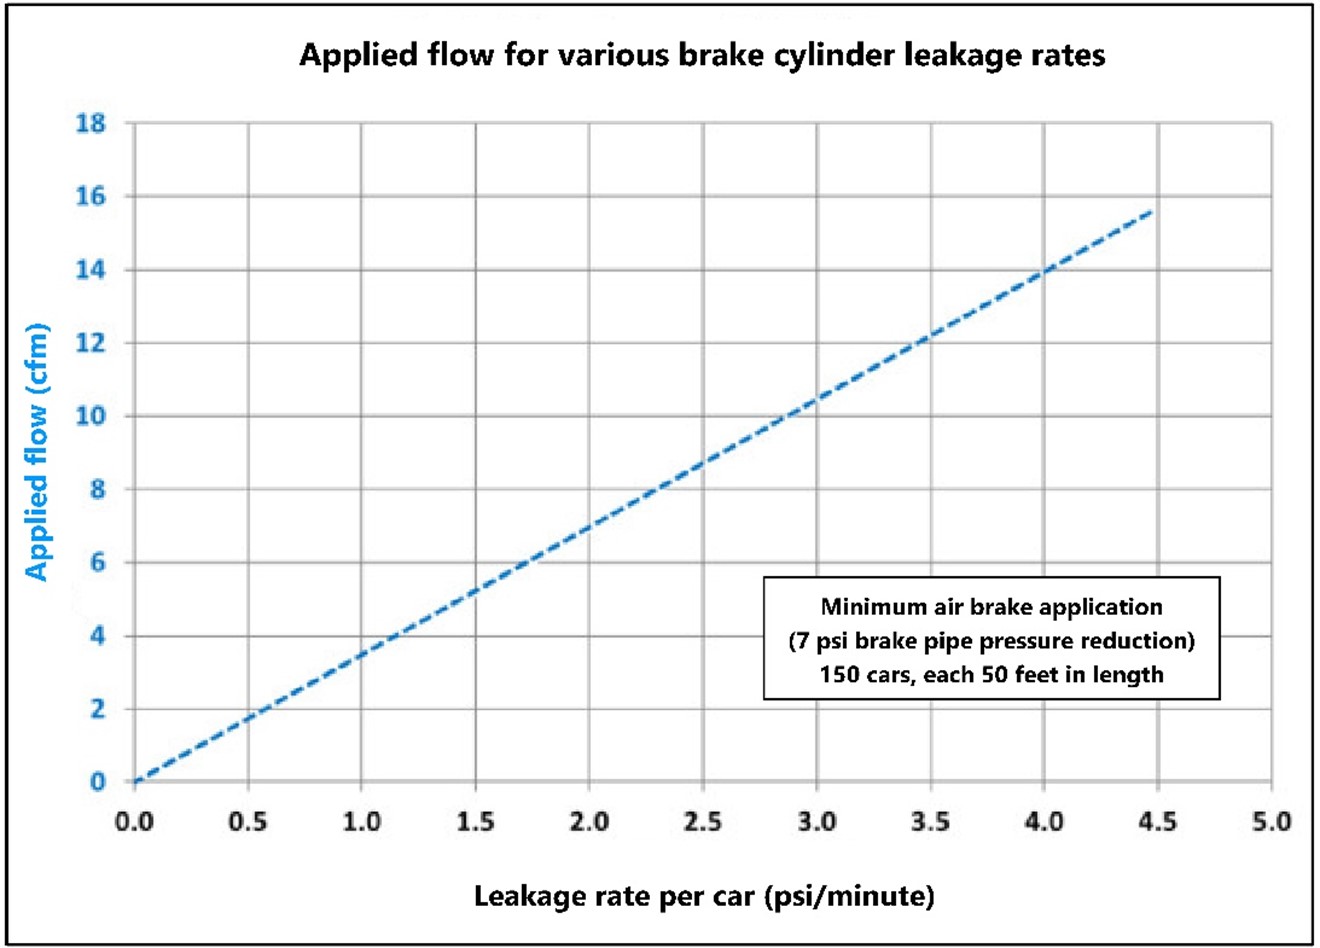 Applied flow increase for 150 cars, each 50 feet in length (Source: Wabtec, with TSB annotations)